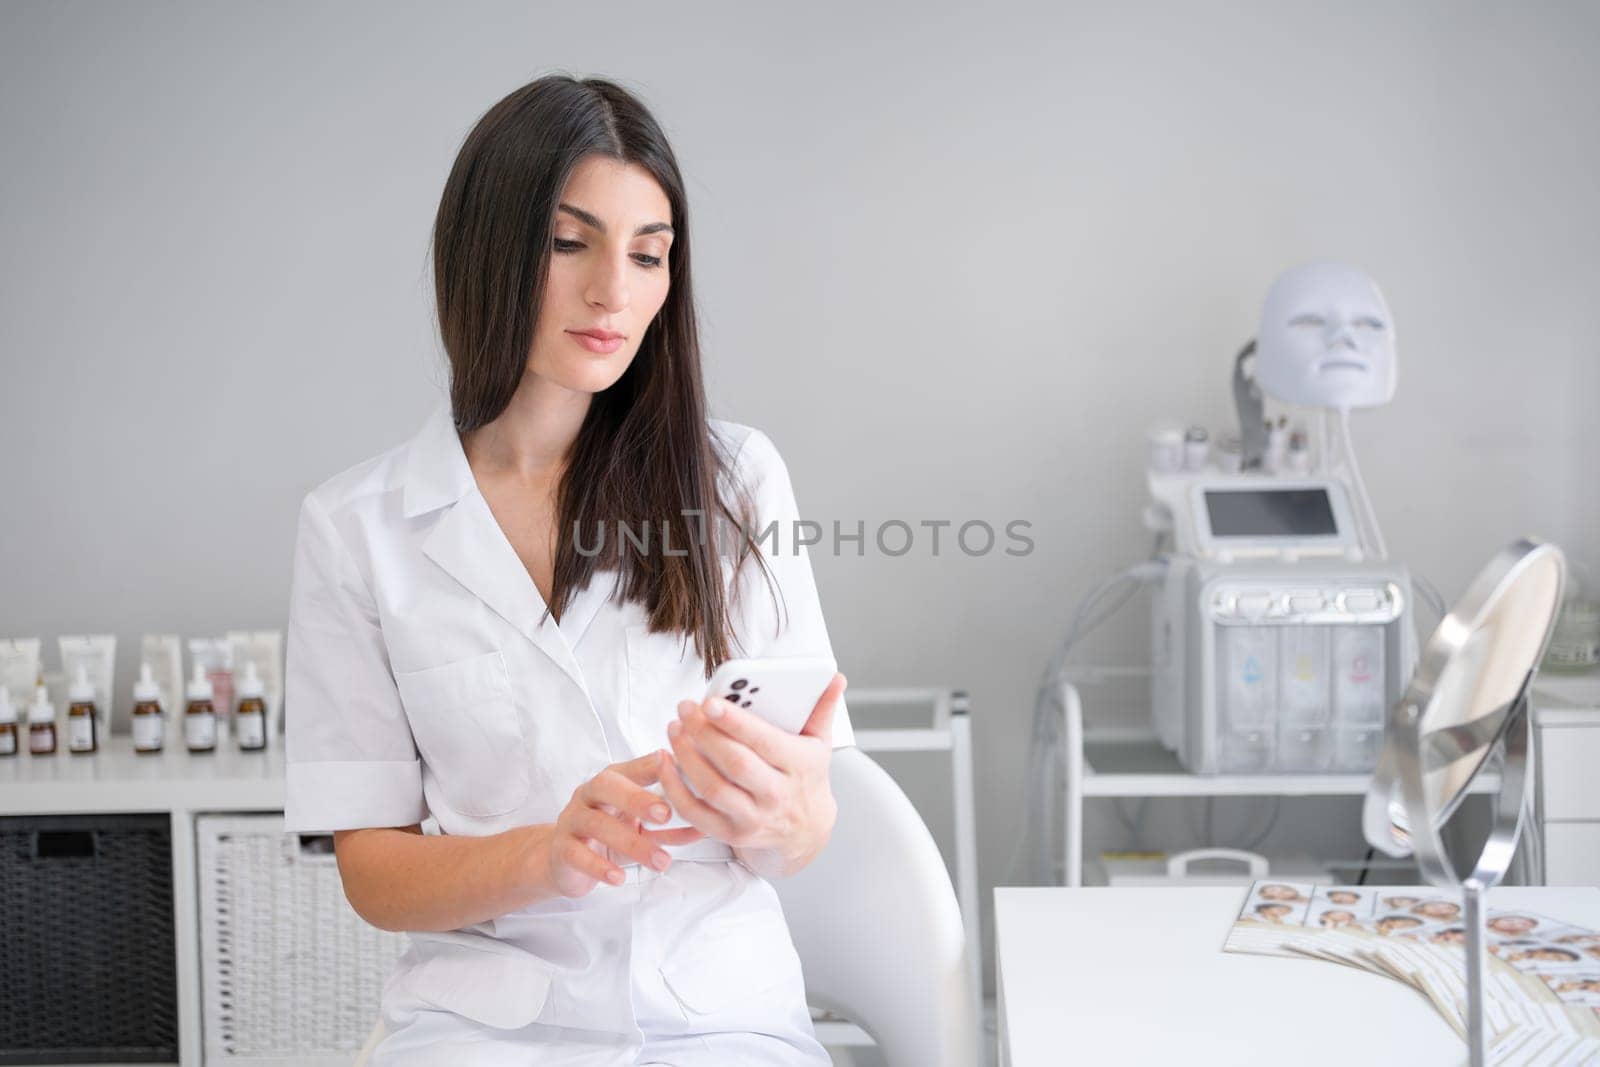 Cosmetologist in beauty salon sitting looking on phone screen. Dermatologist in beauty clinic plain facial skin treatments for clients in beauty salon using smartphone